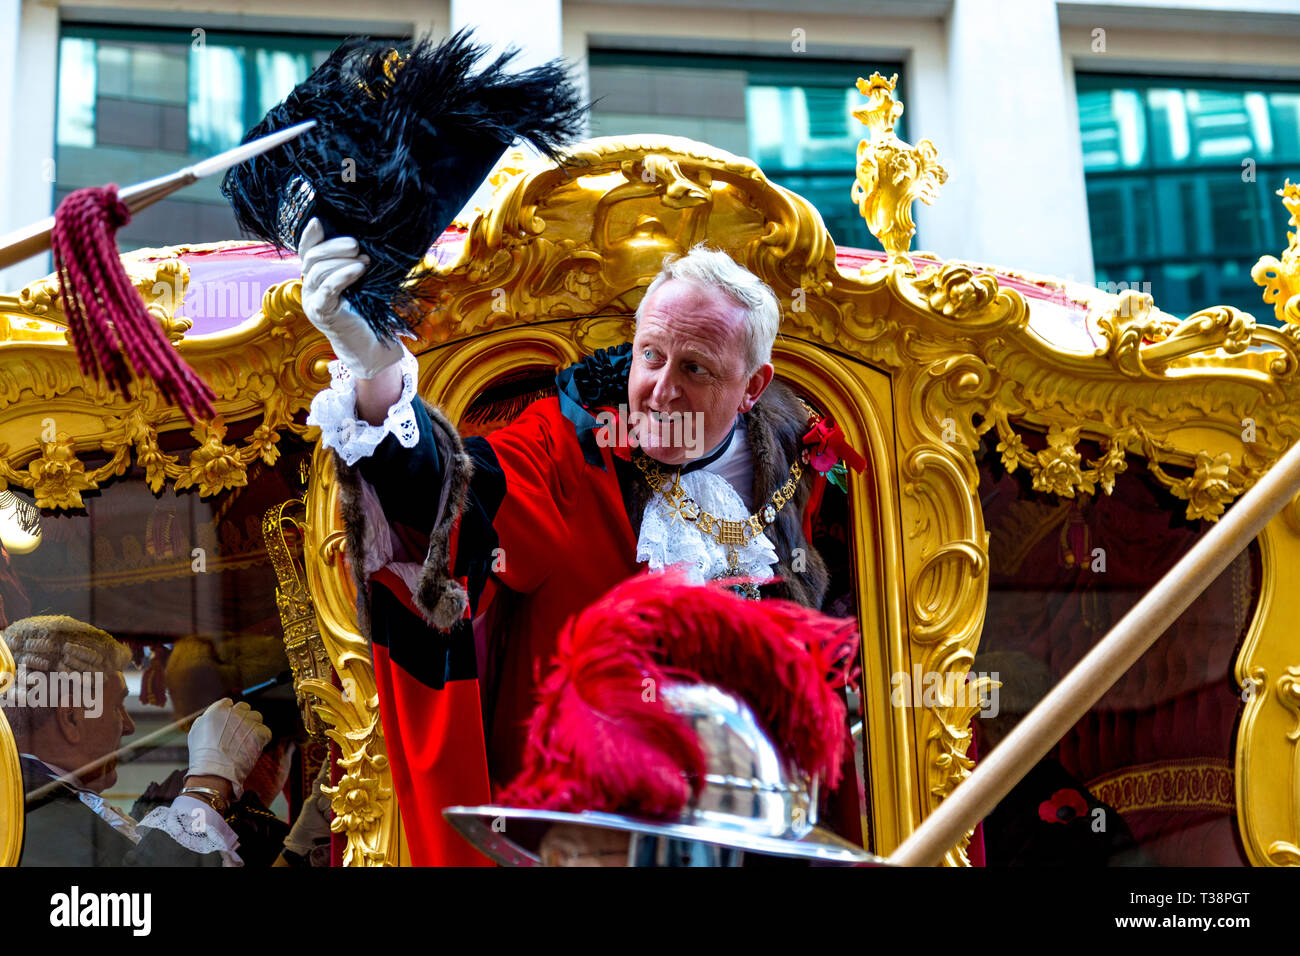 10th November 2018 London, UK - 691st Lord Mayor of London 2018 2019 Peter Estlin in a golden carriage at the Lord Mayor's Parade Stock Photo